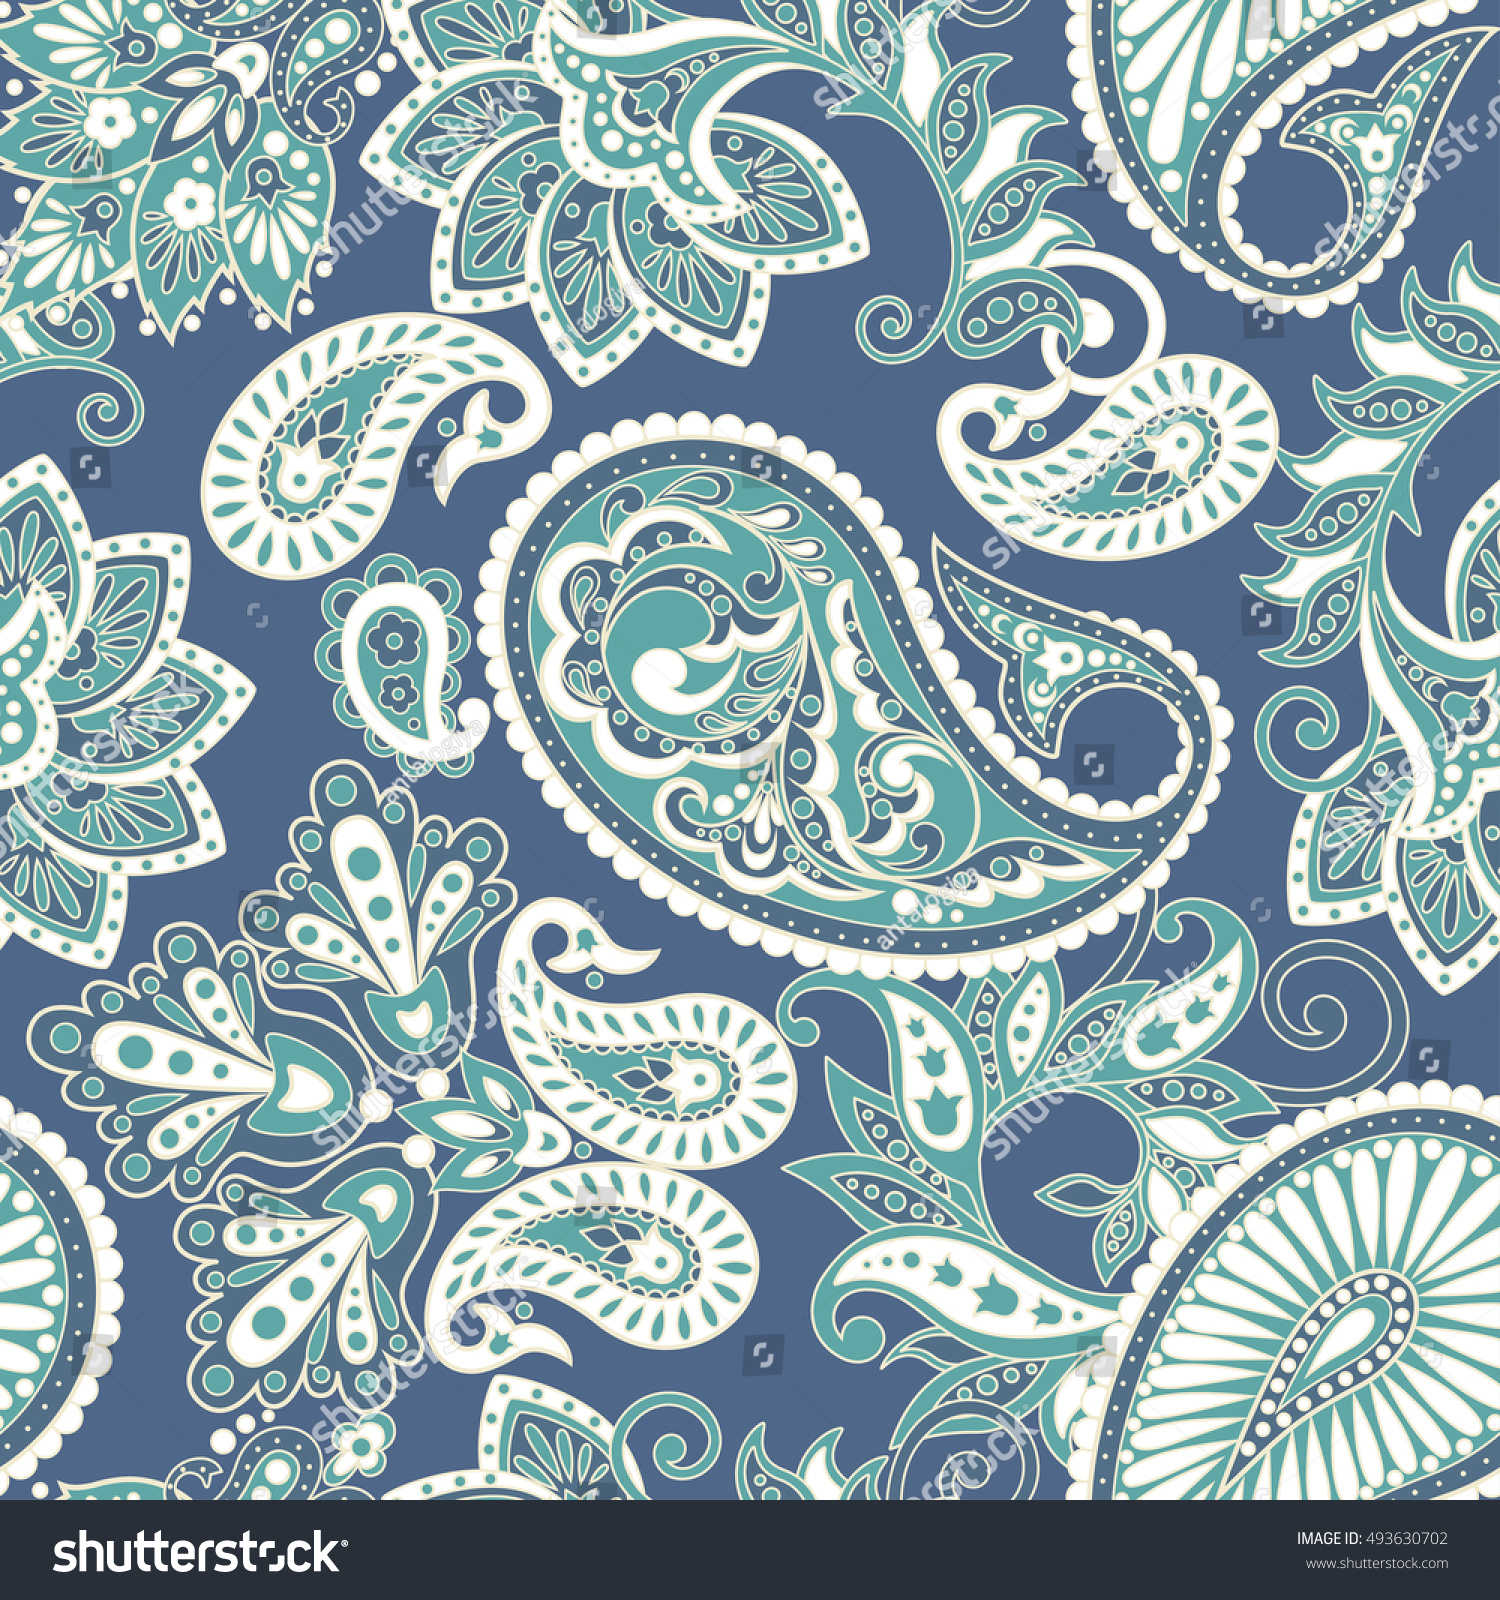 Paisley Seamless Pattern Vintage Floral Background Stock Vector ...